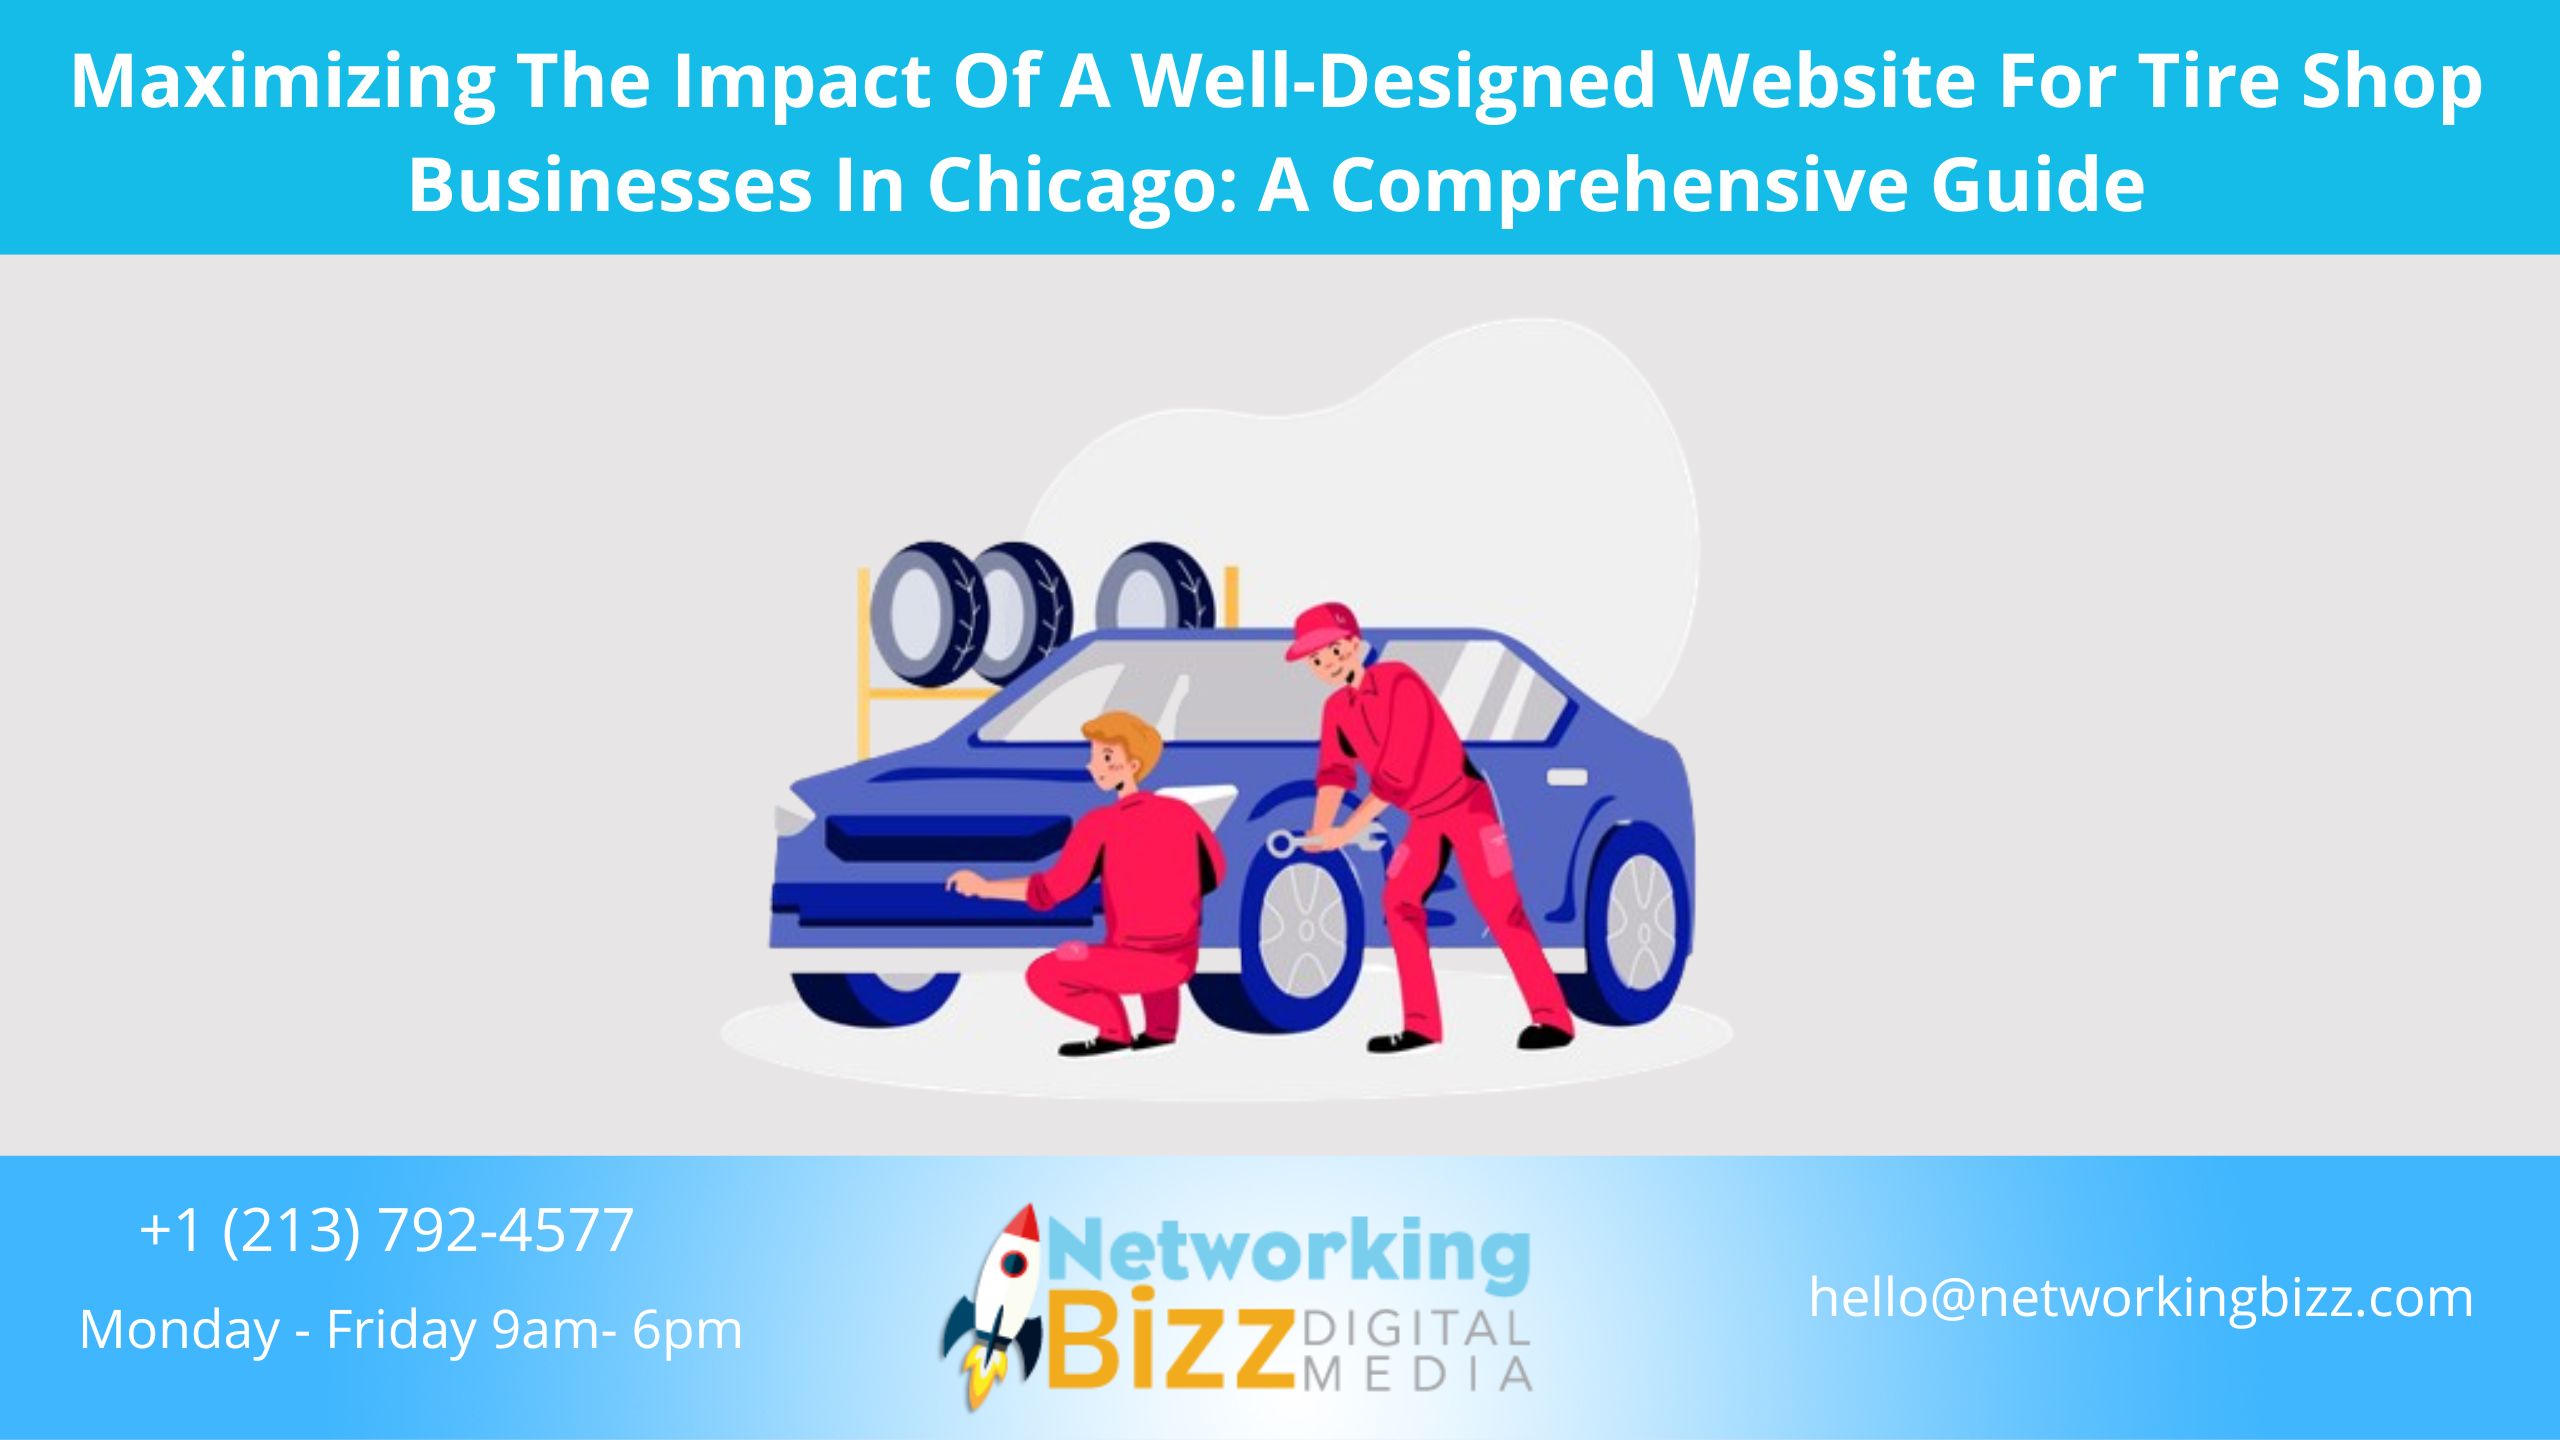 Maximizing The Impact Of A Well-Designed Website For Tire Shop Businesses In Chicago: A Comprehensive Guide